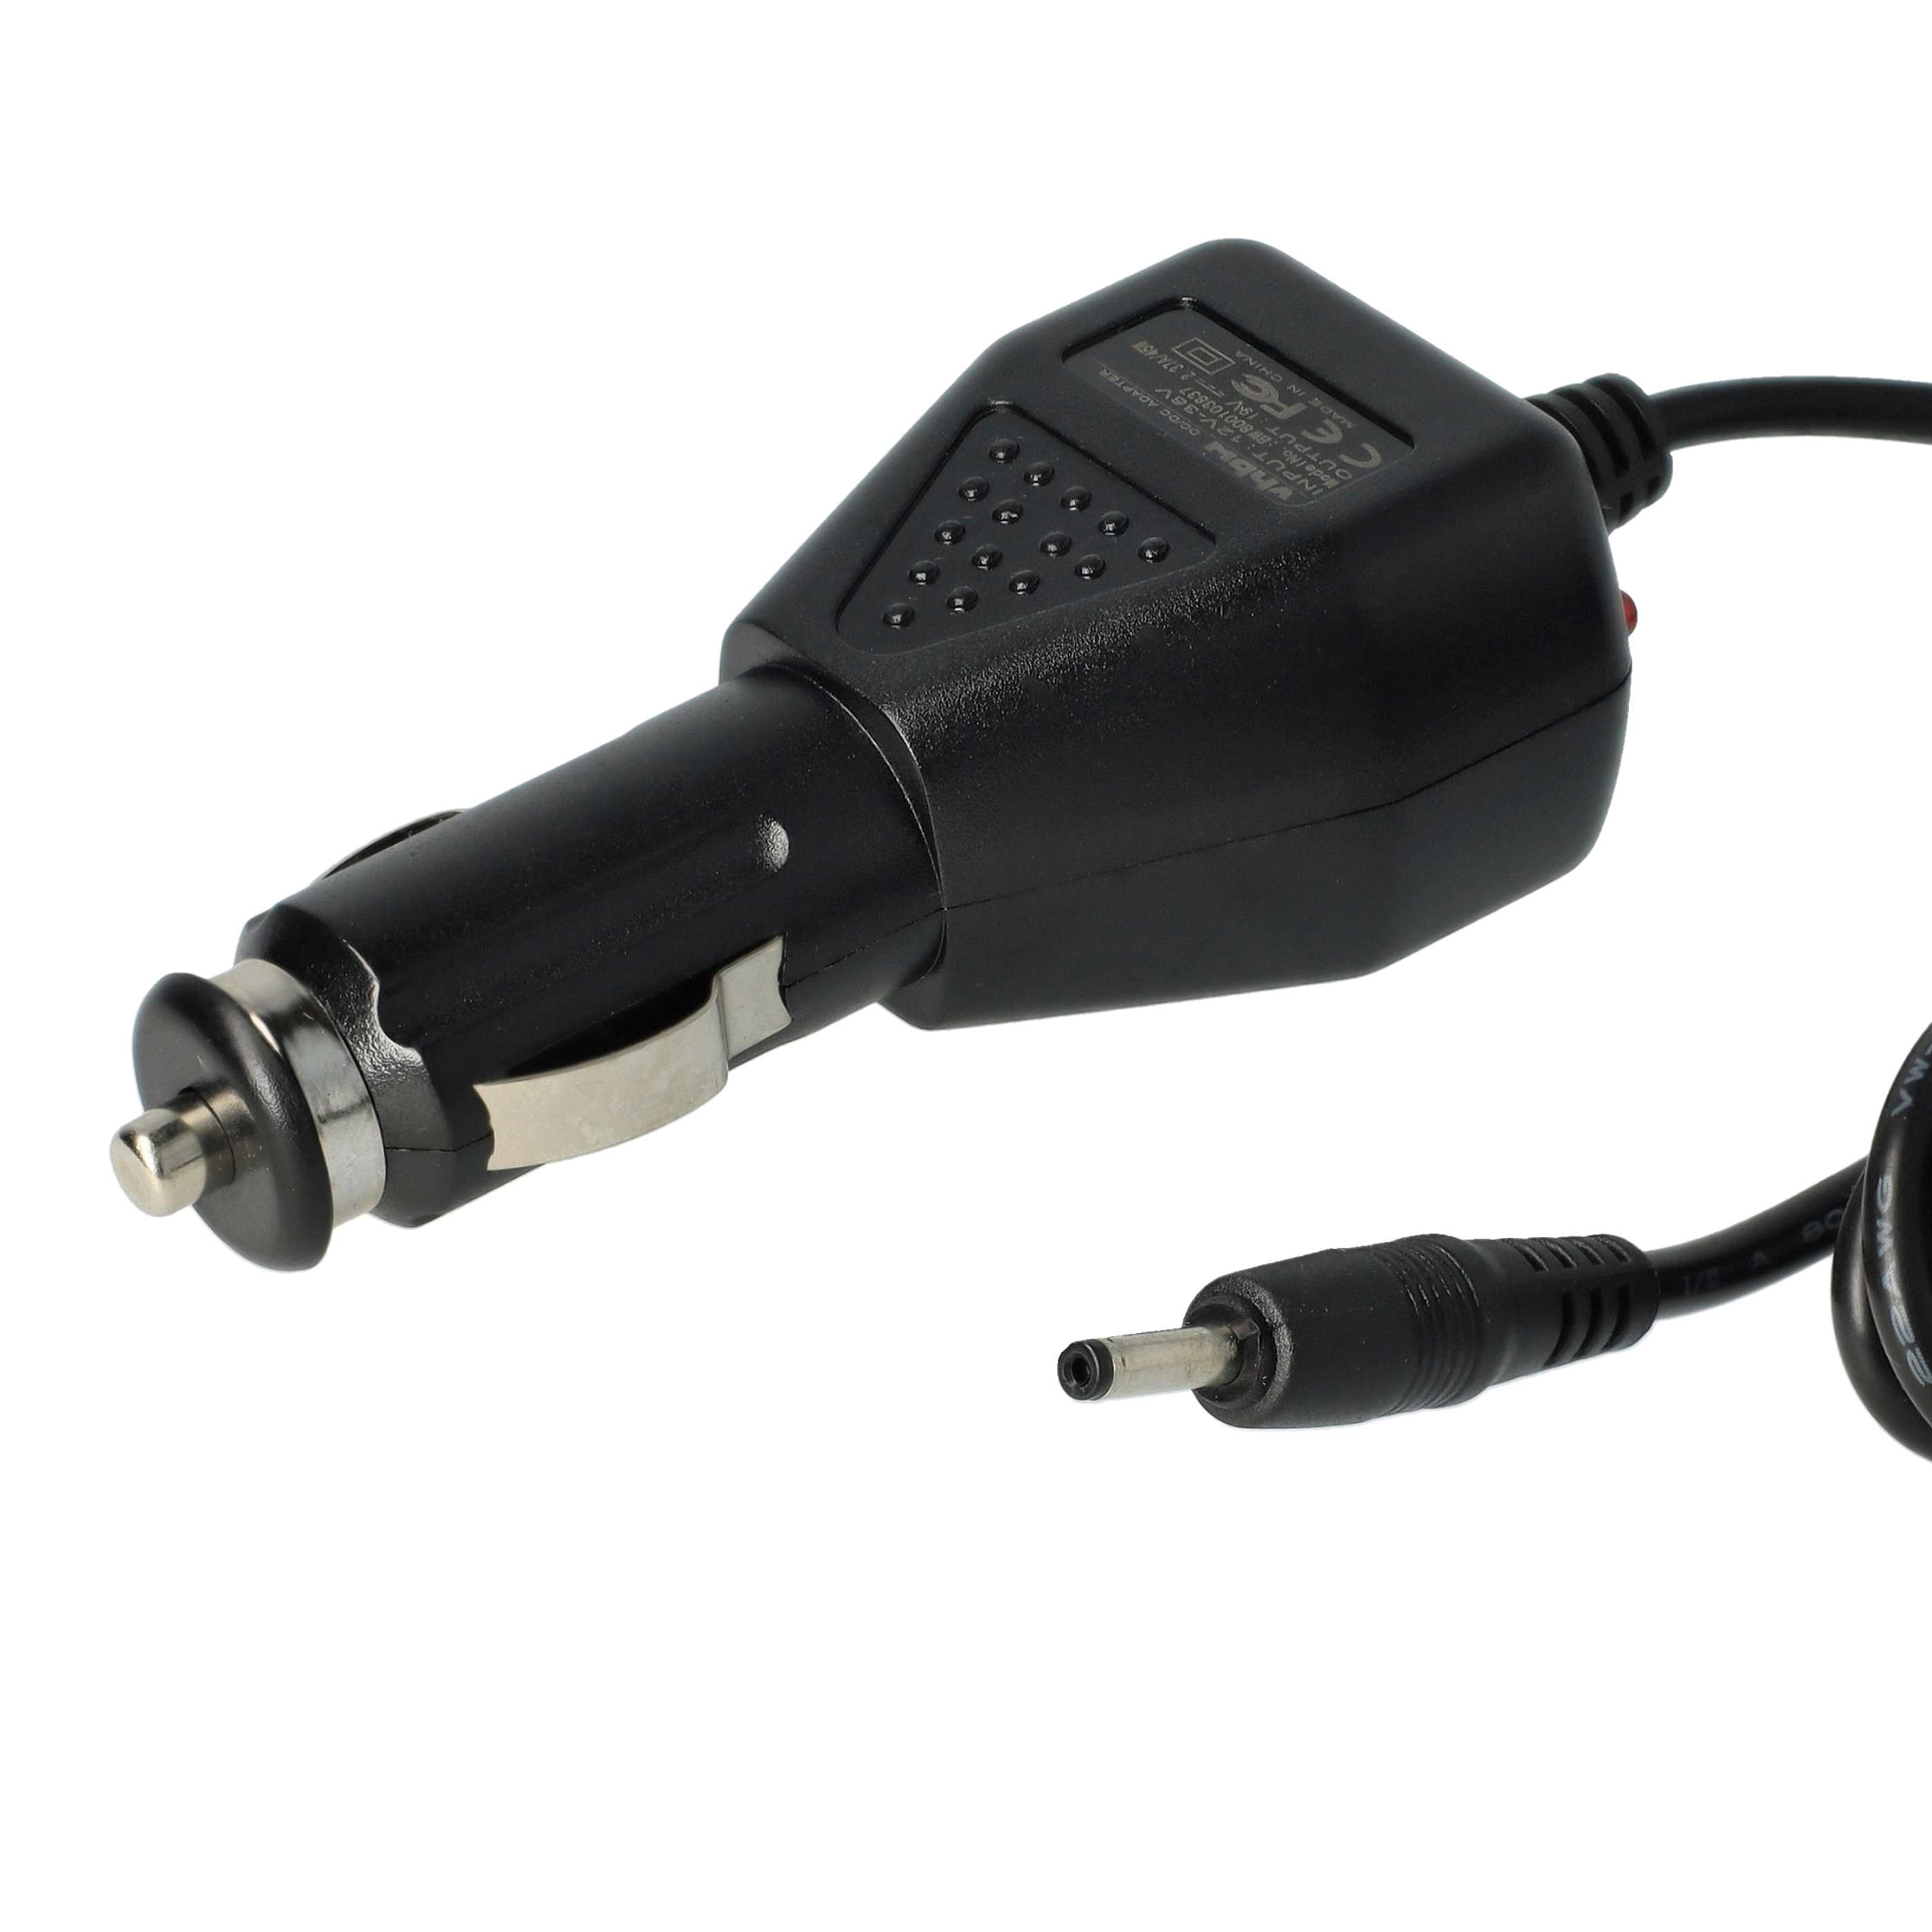 Cable carga coche reemplaza Asus MBA1307, ADP-45AW, ADP-40MHB para notebook - 2,37 A